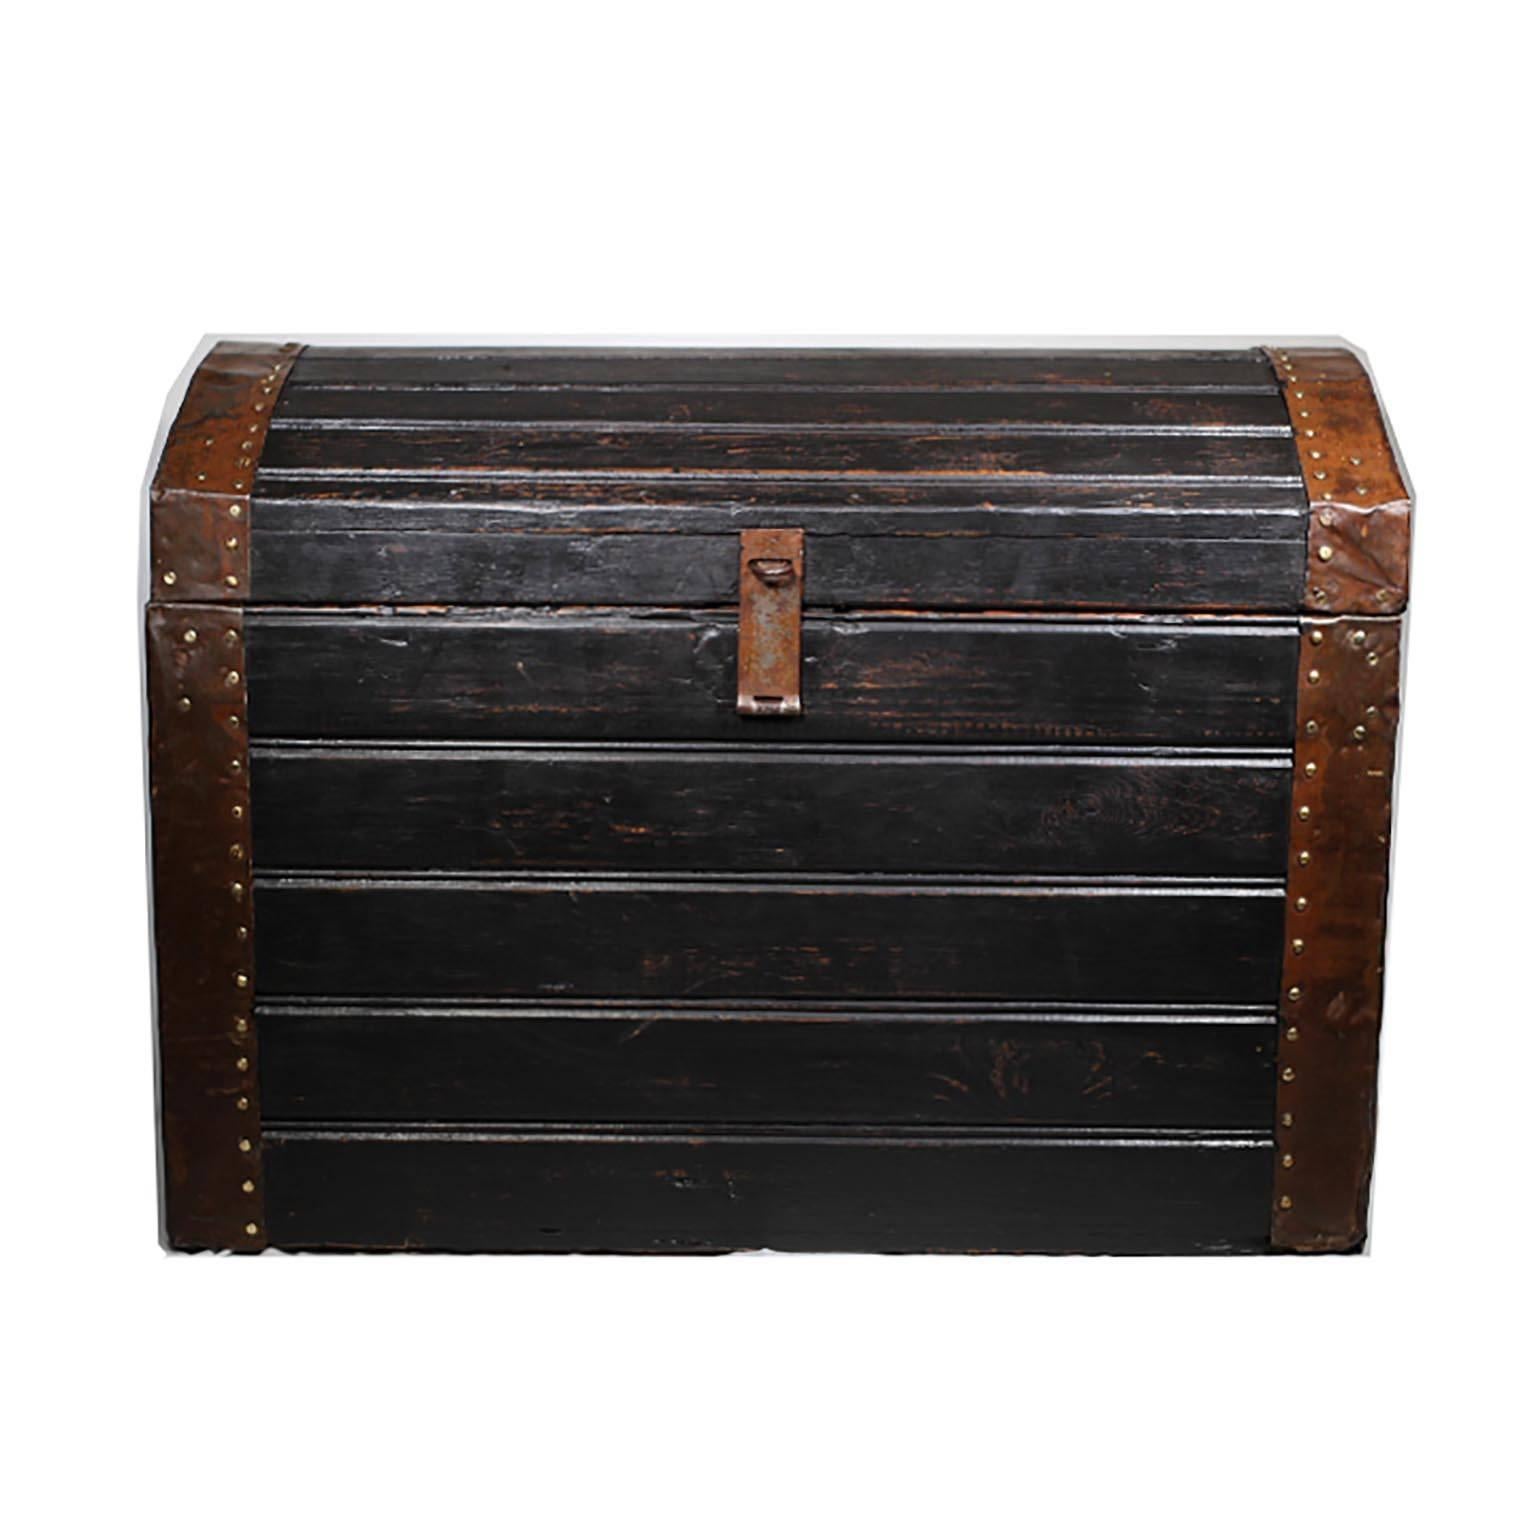 Black wooden trunk with copper plated metal bands wrapped around the edges. Original label on the side date 1907. Possibly Swedish.